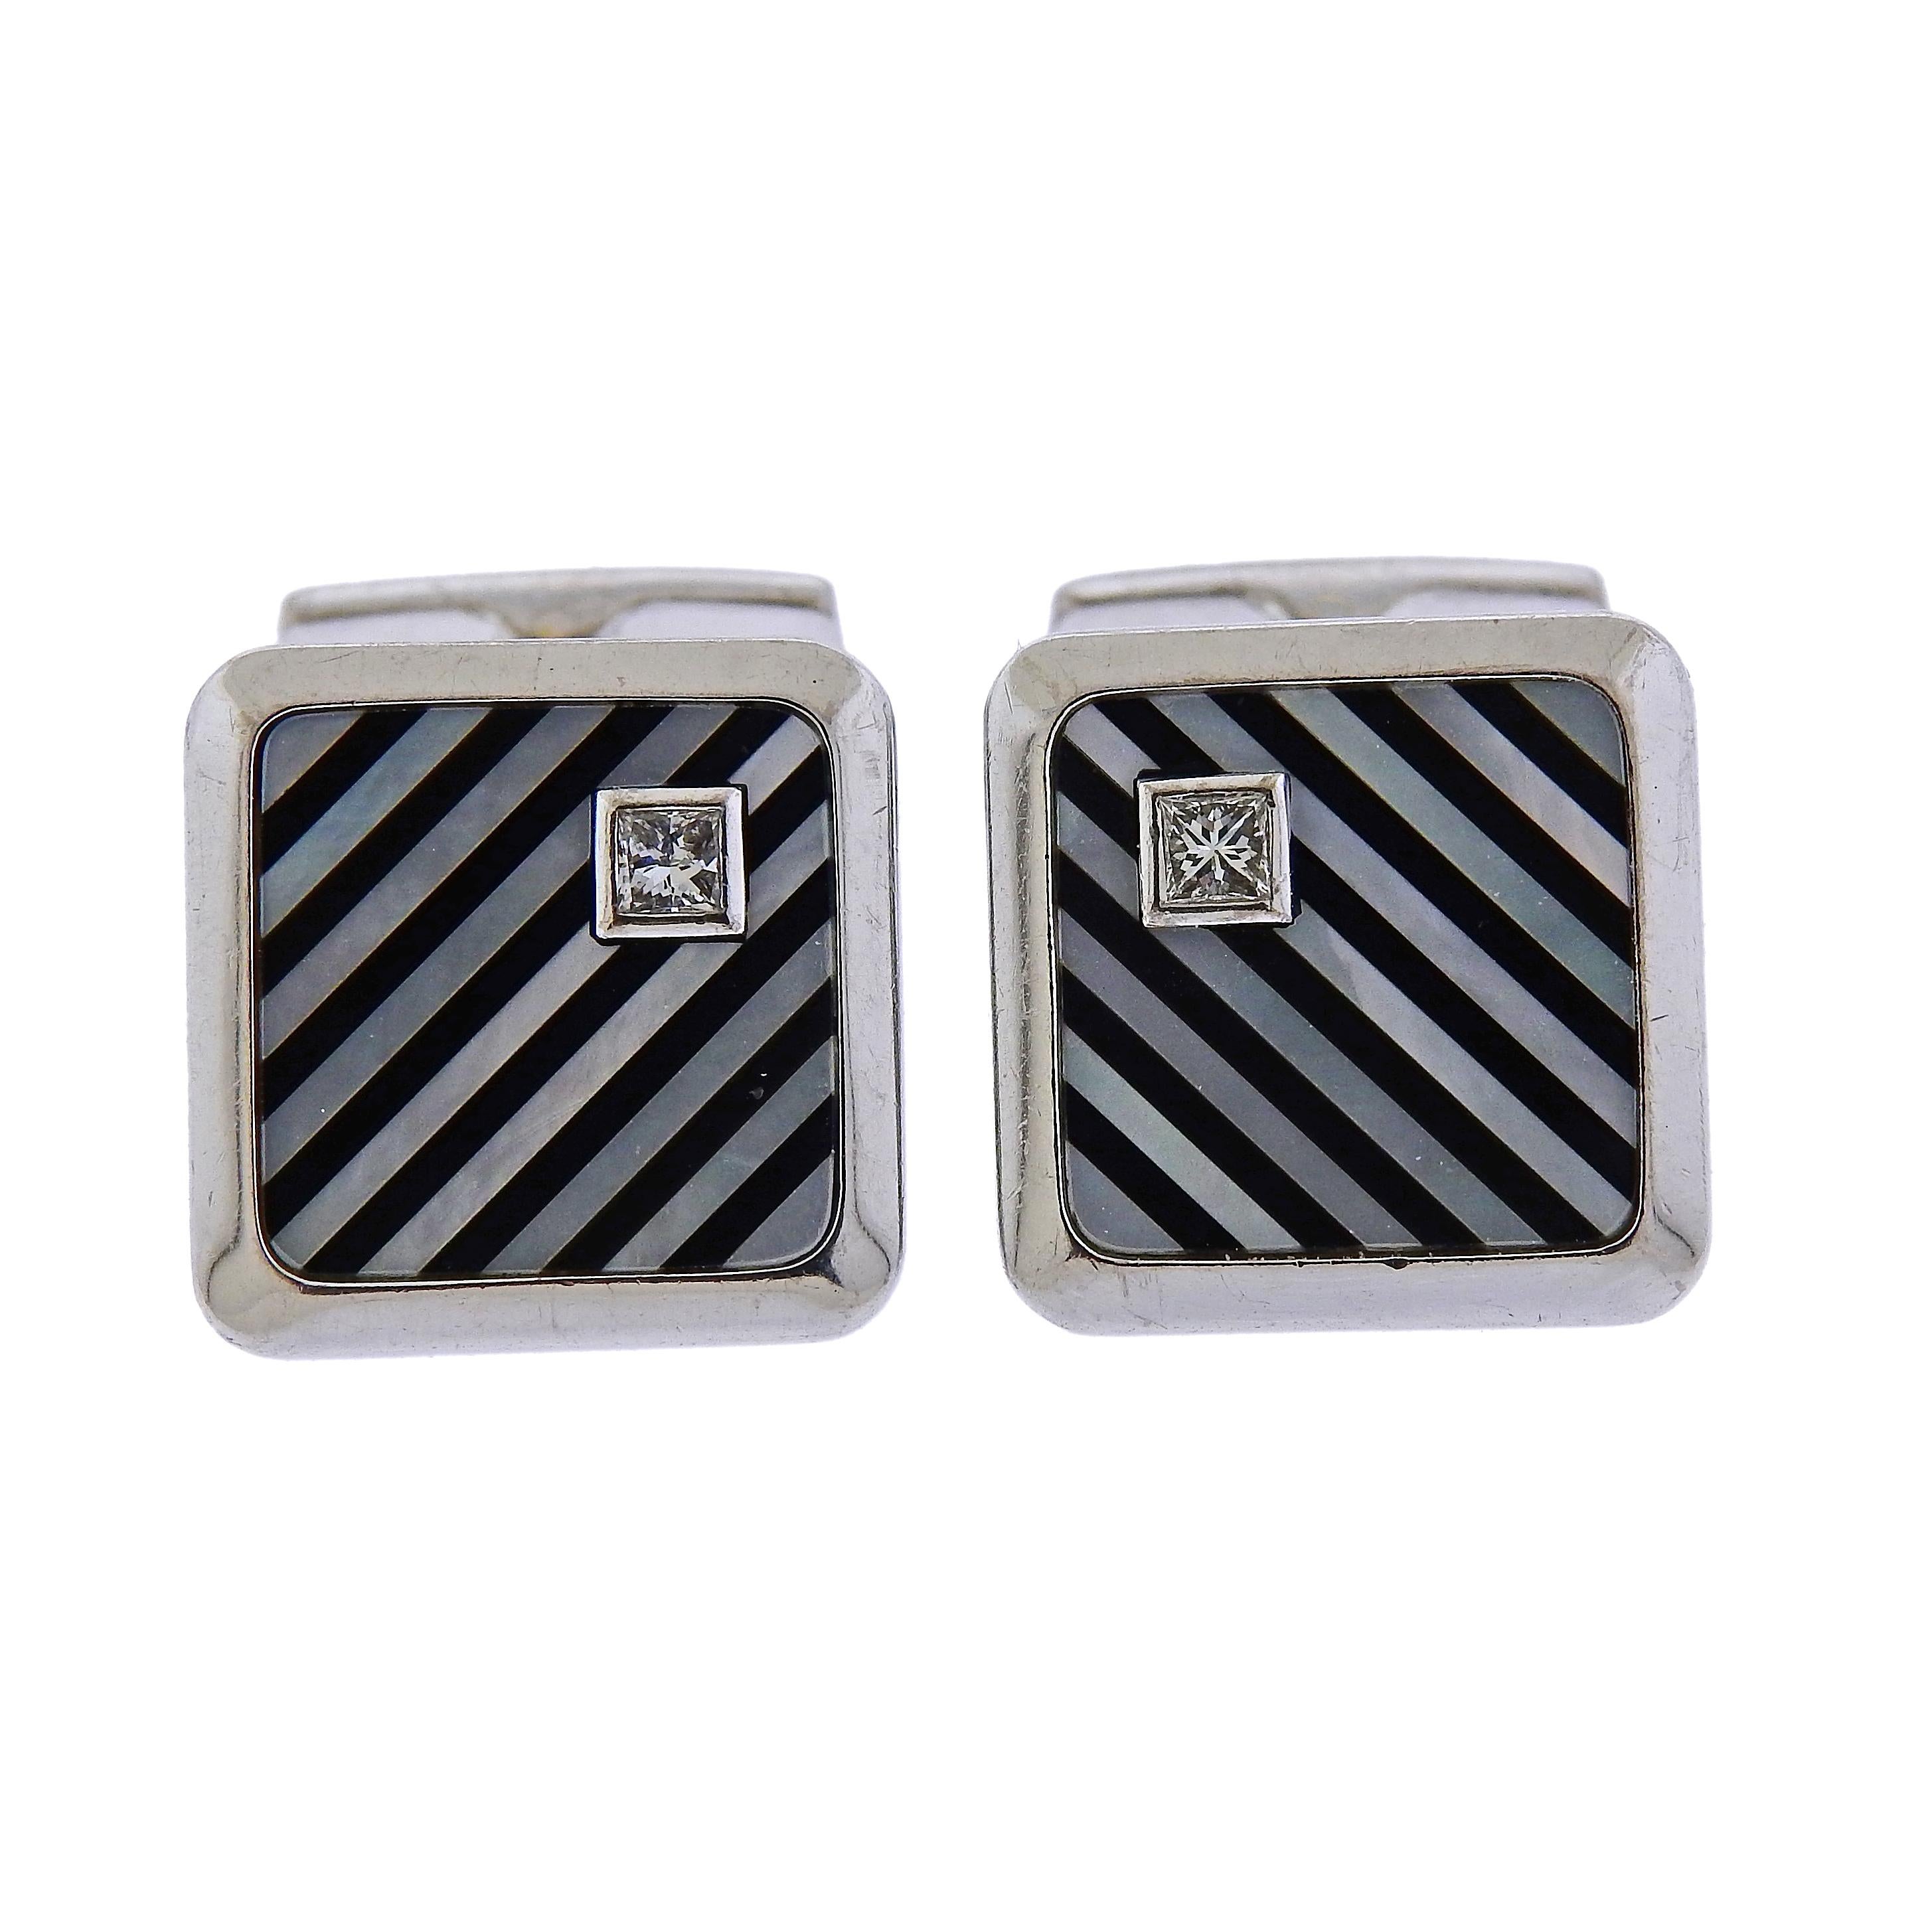 18k gold pair of cufflinks by Piaget, featuring onyx and mother of pearl inlaid stripes, as well as 0.09ctw in diamonds. Cufflink top is 16mm x 16mm, cufflinks weigh 17.5 grams. Marked A20930, 0.09, Piaget, 750.